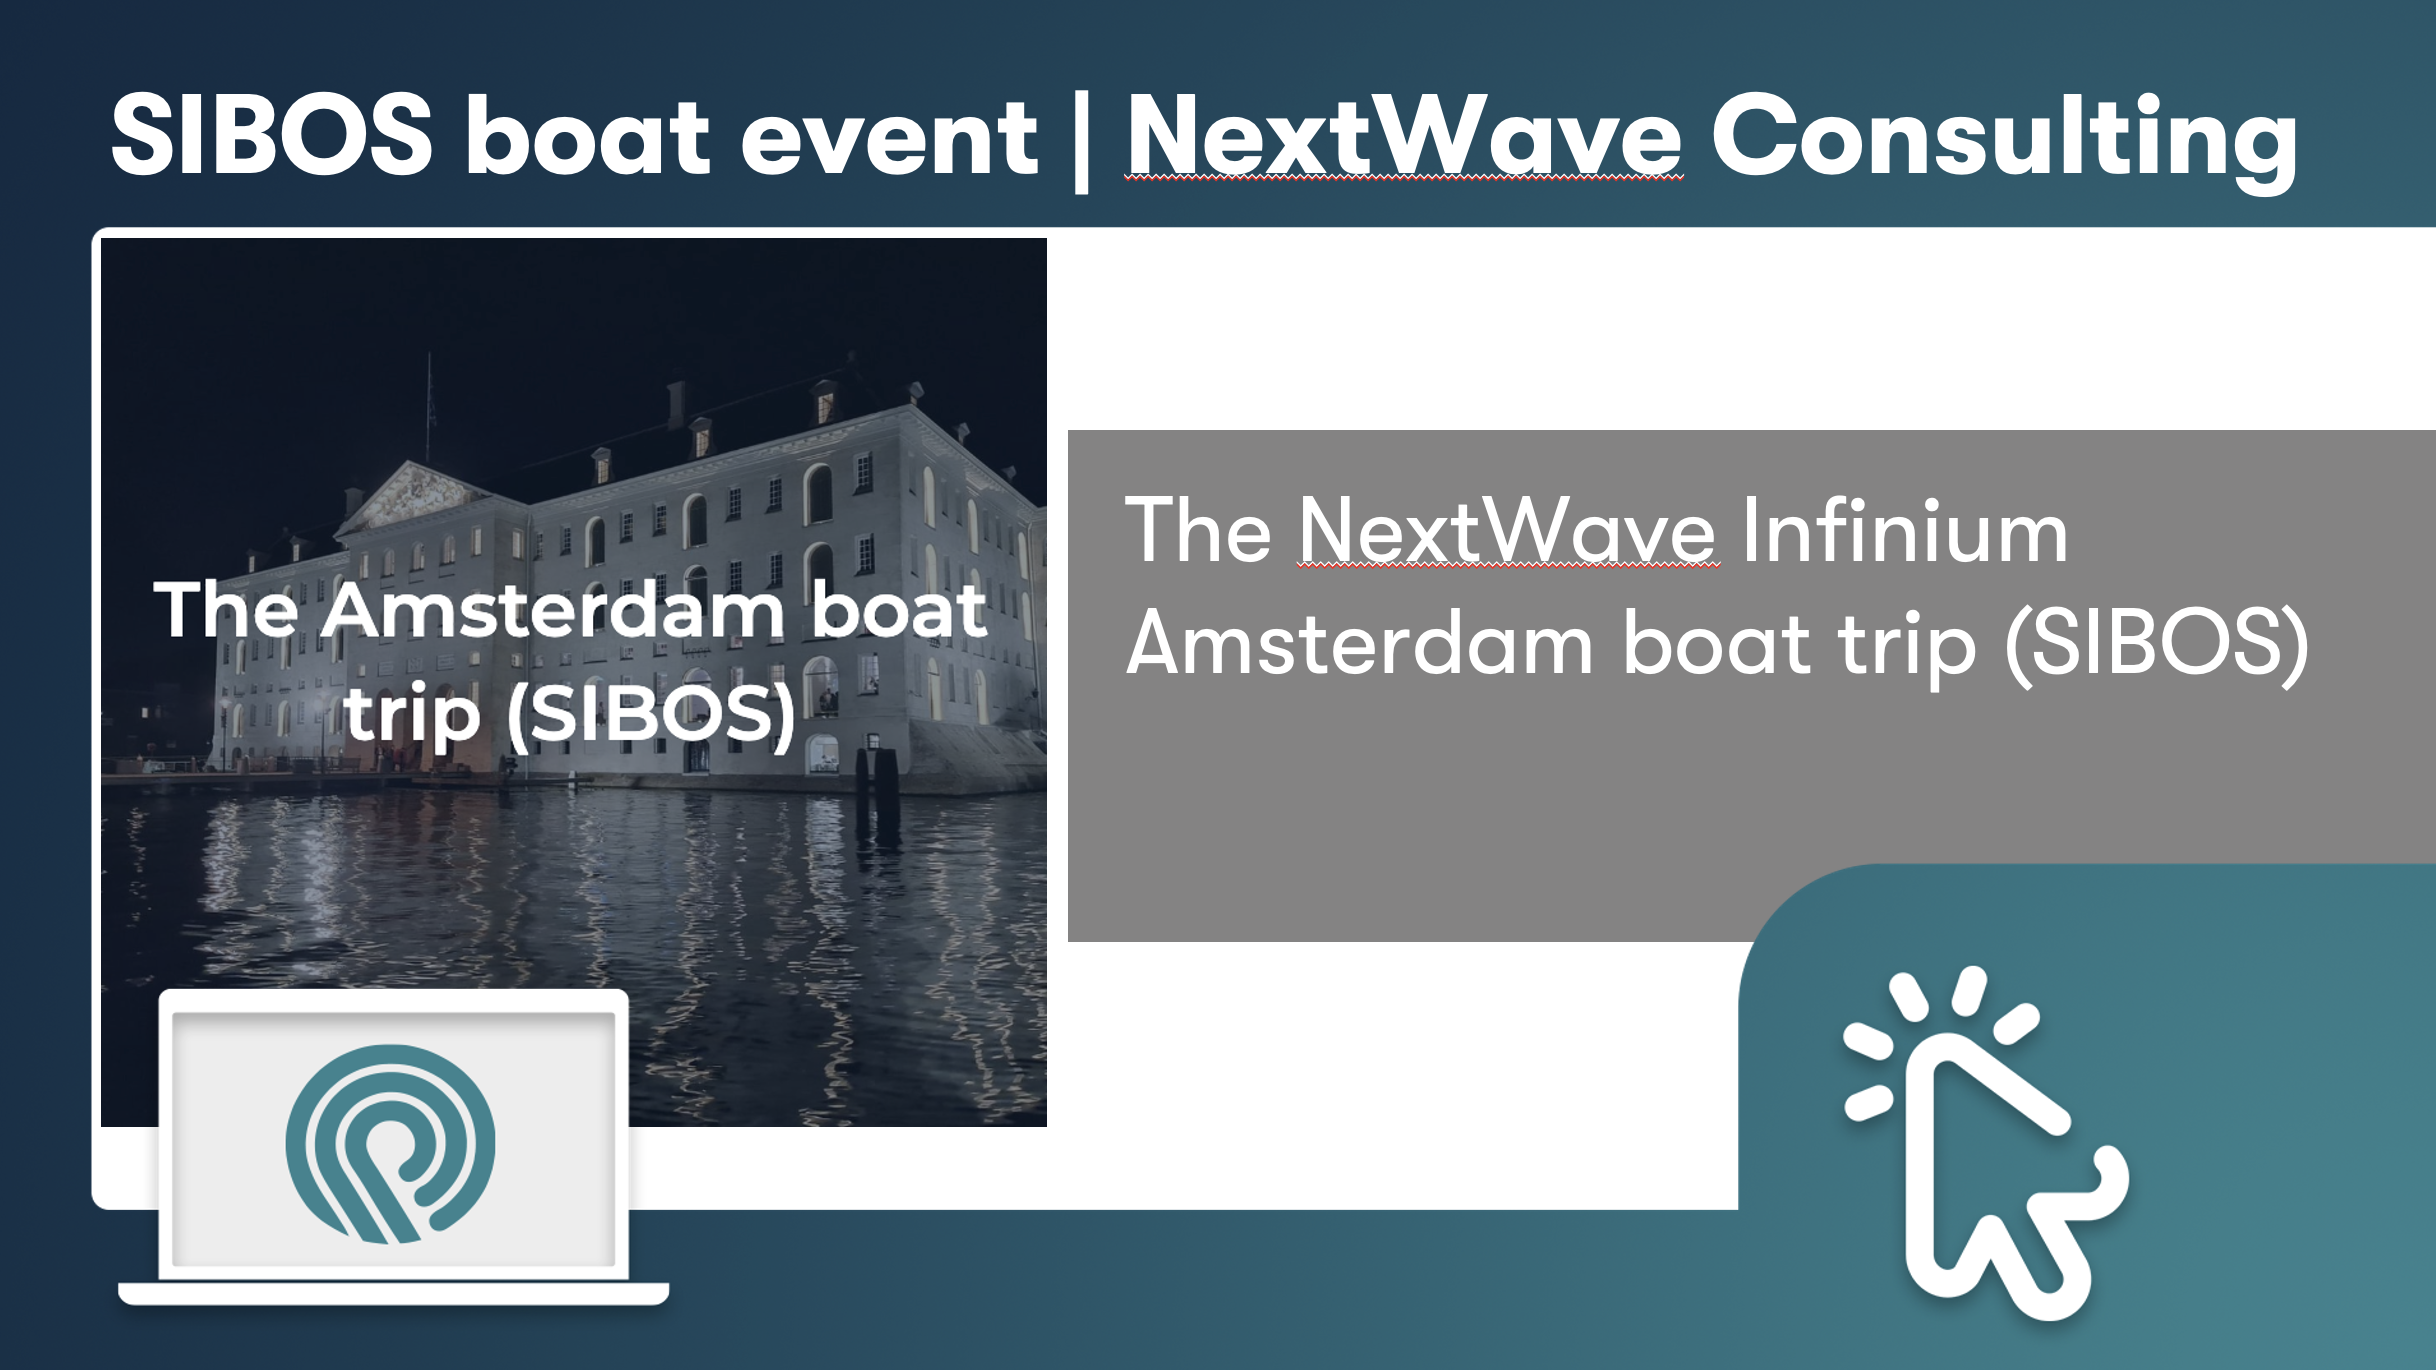 SIBOS boat event | NextWave Consulting